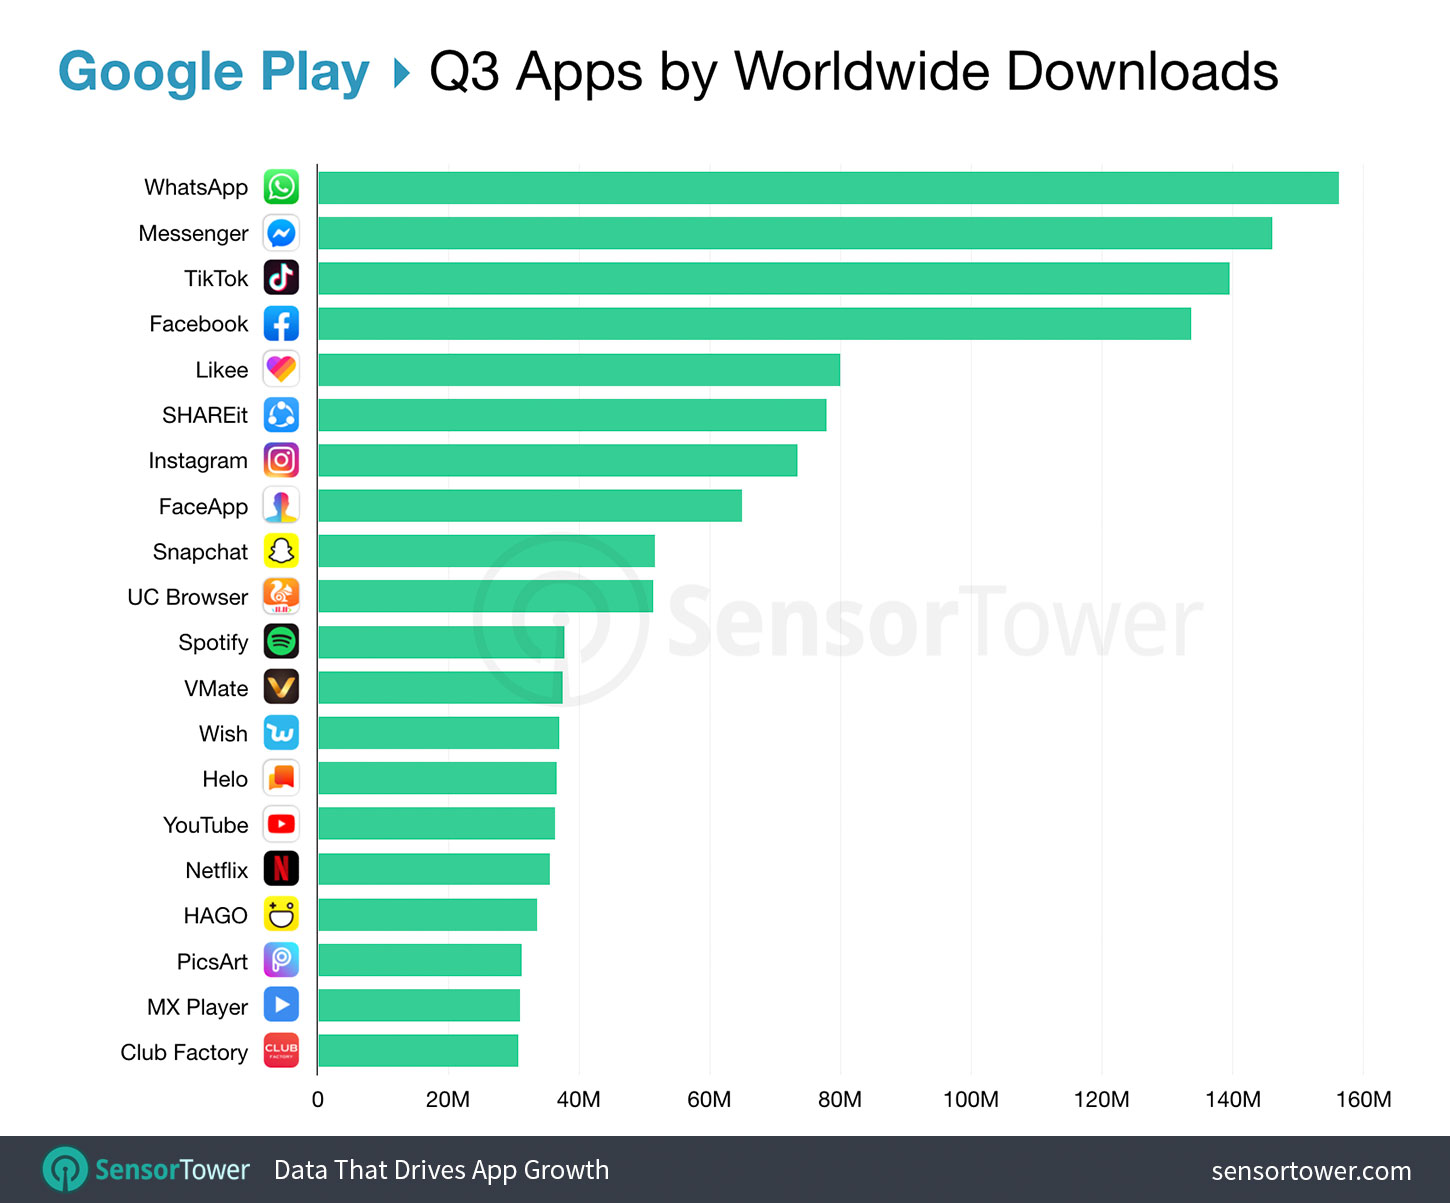 Top Google Play Apps Worldwide for Q3 2019